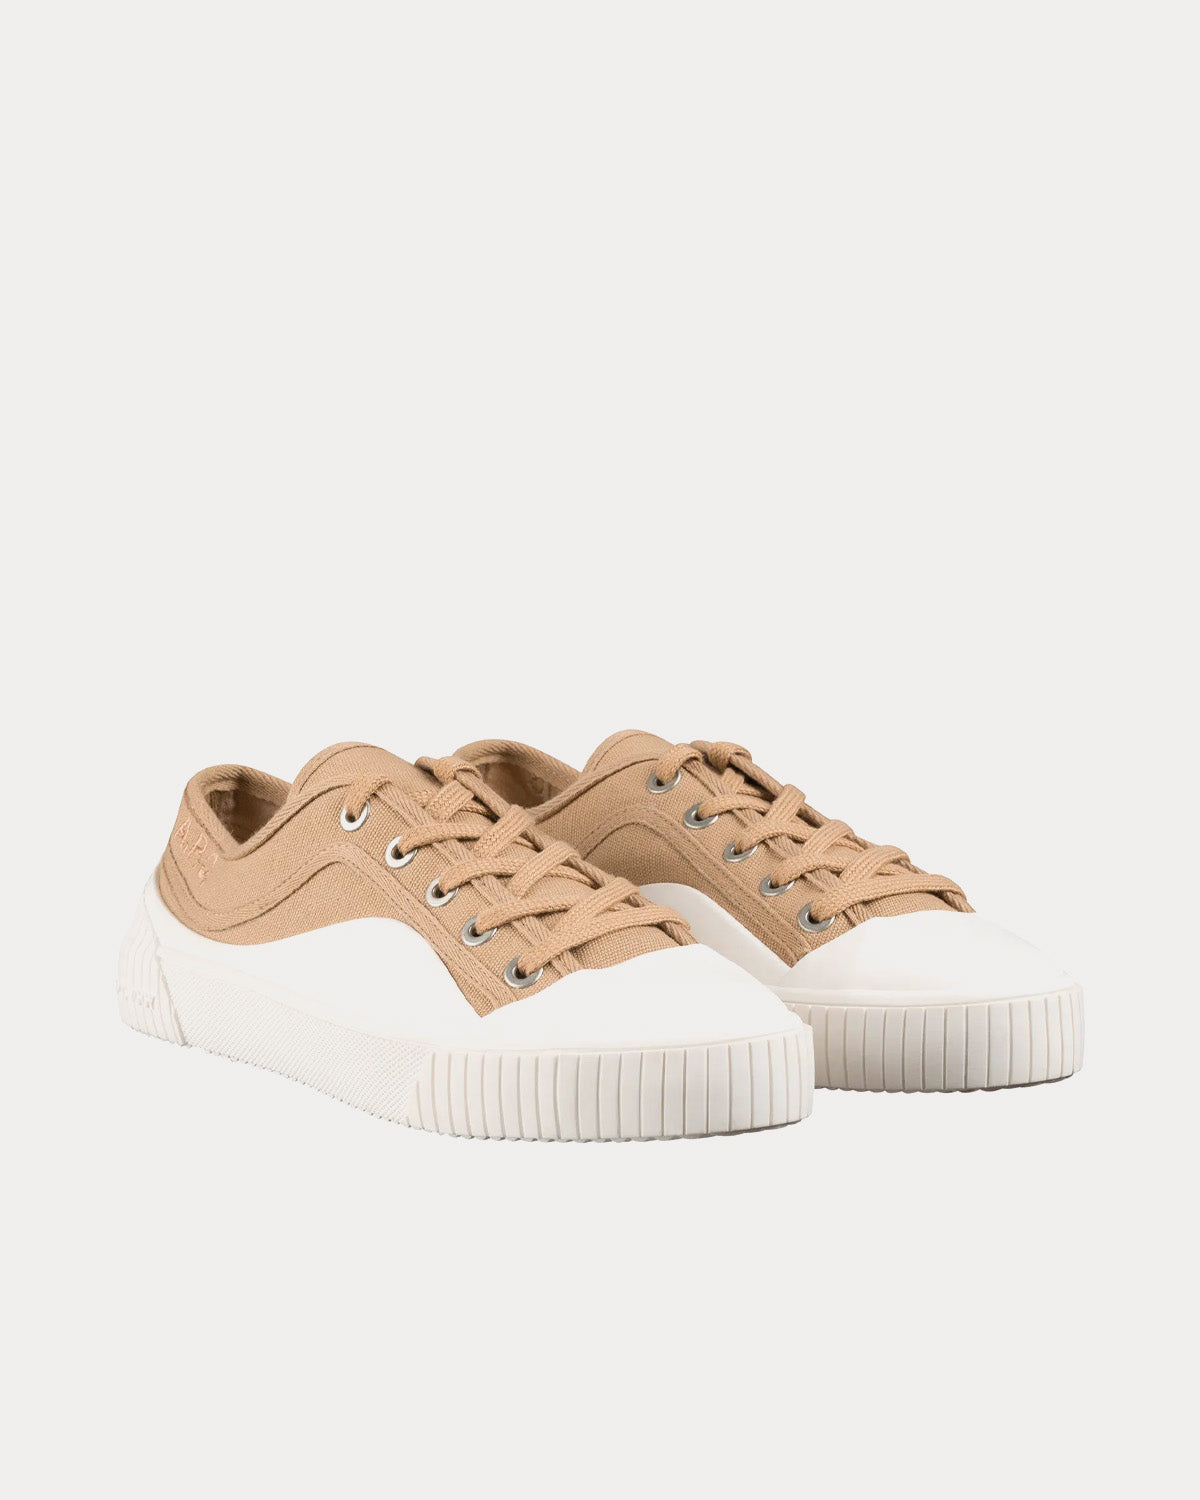 A.P.C. - Iggy Basse Camel Low Top Sneakers